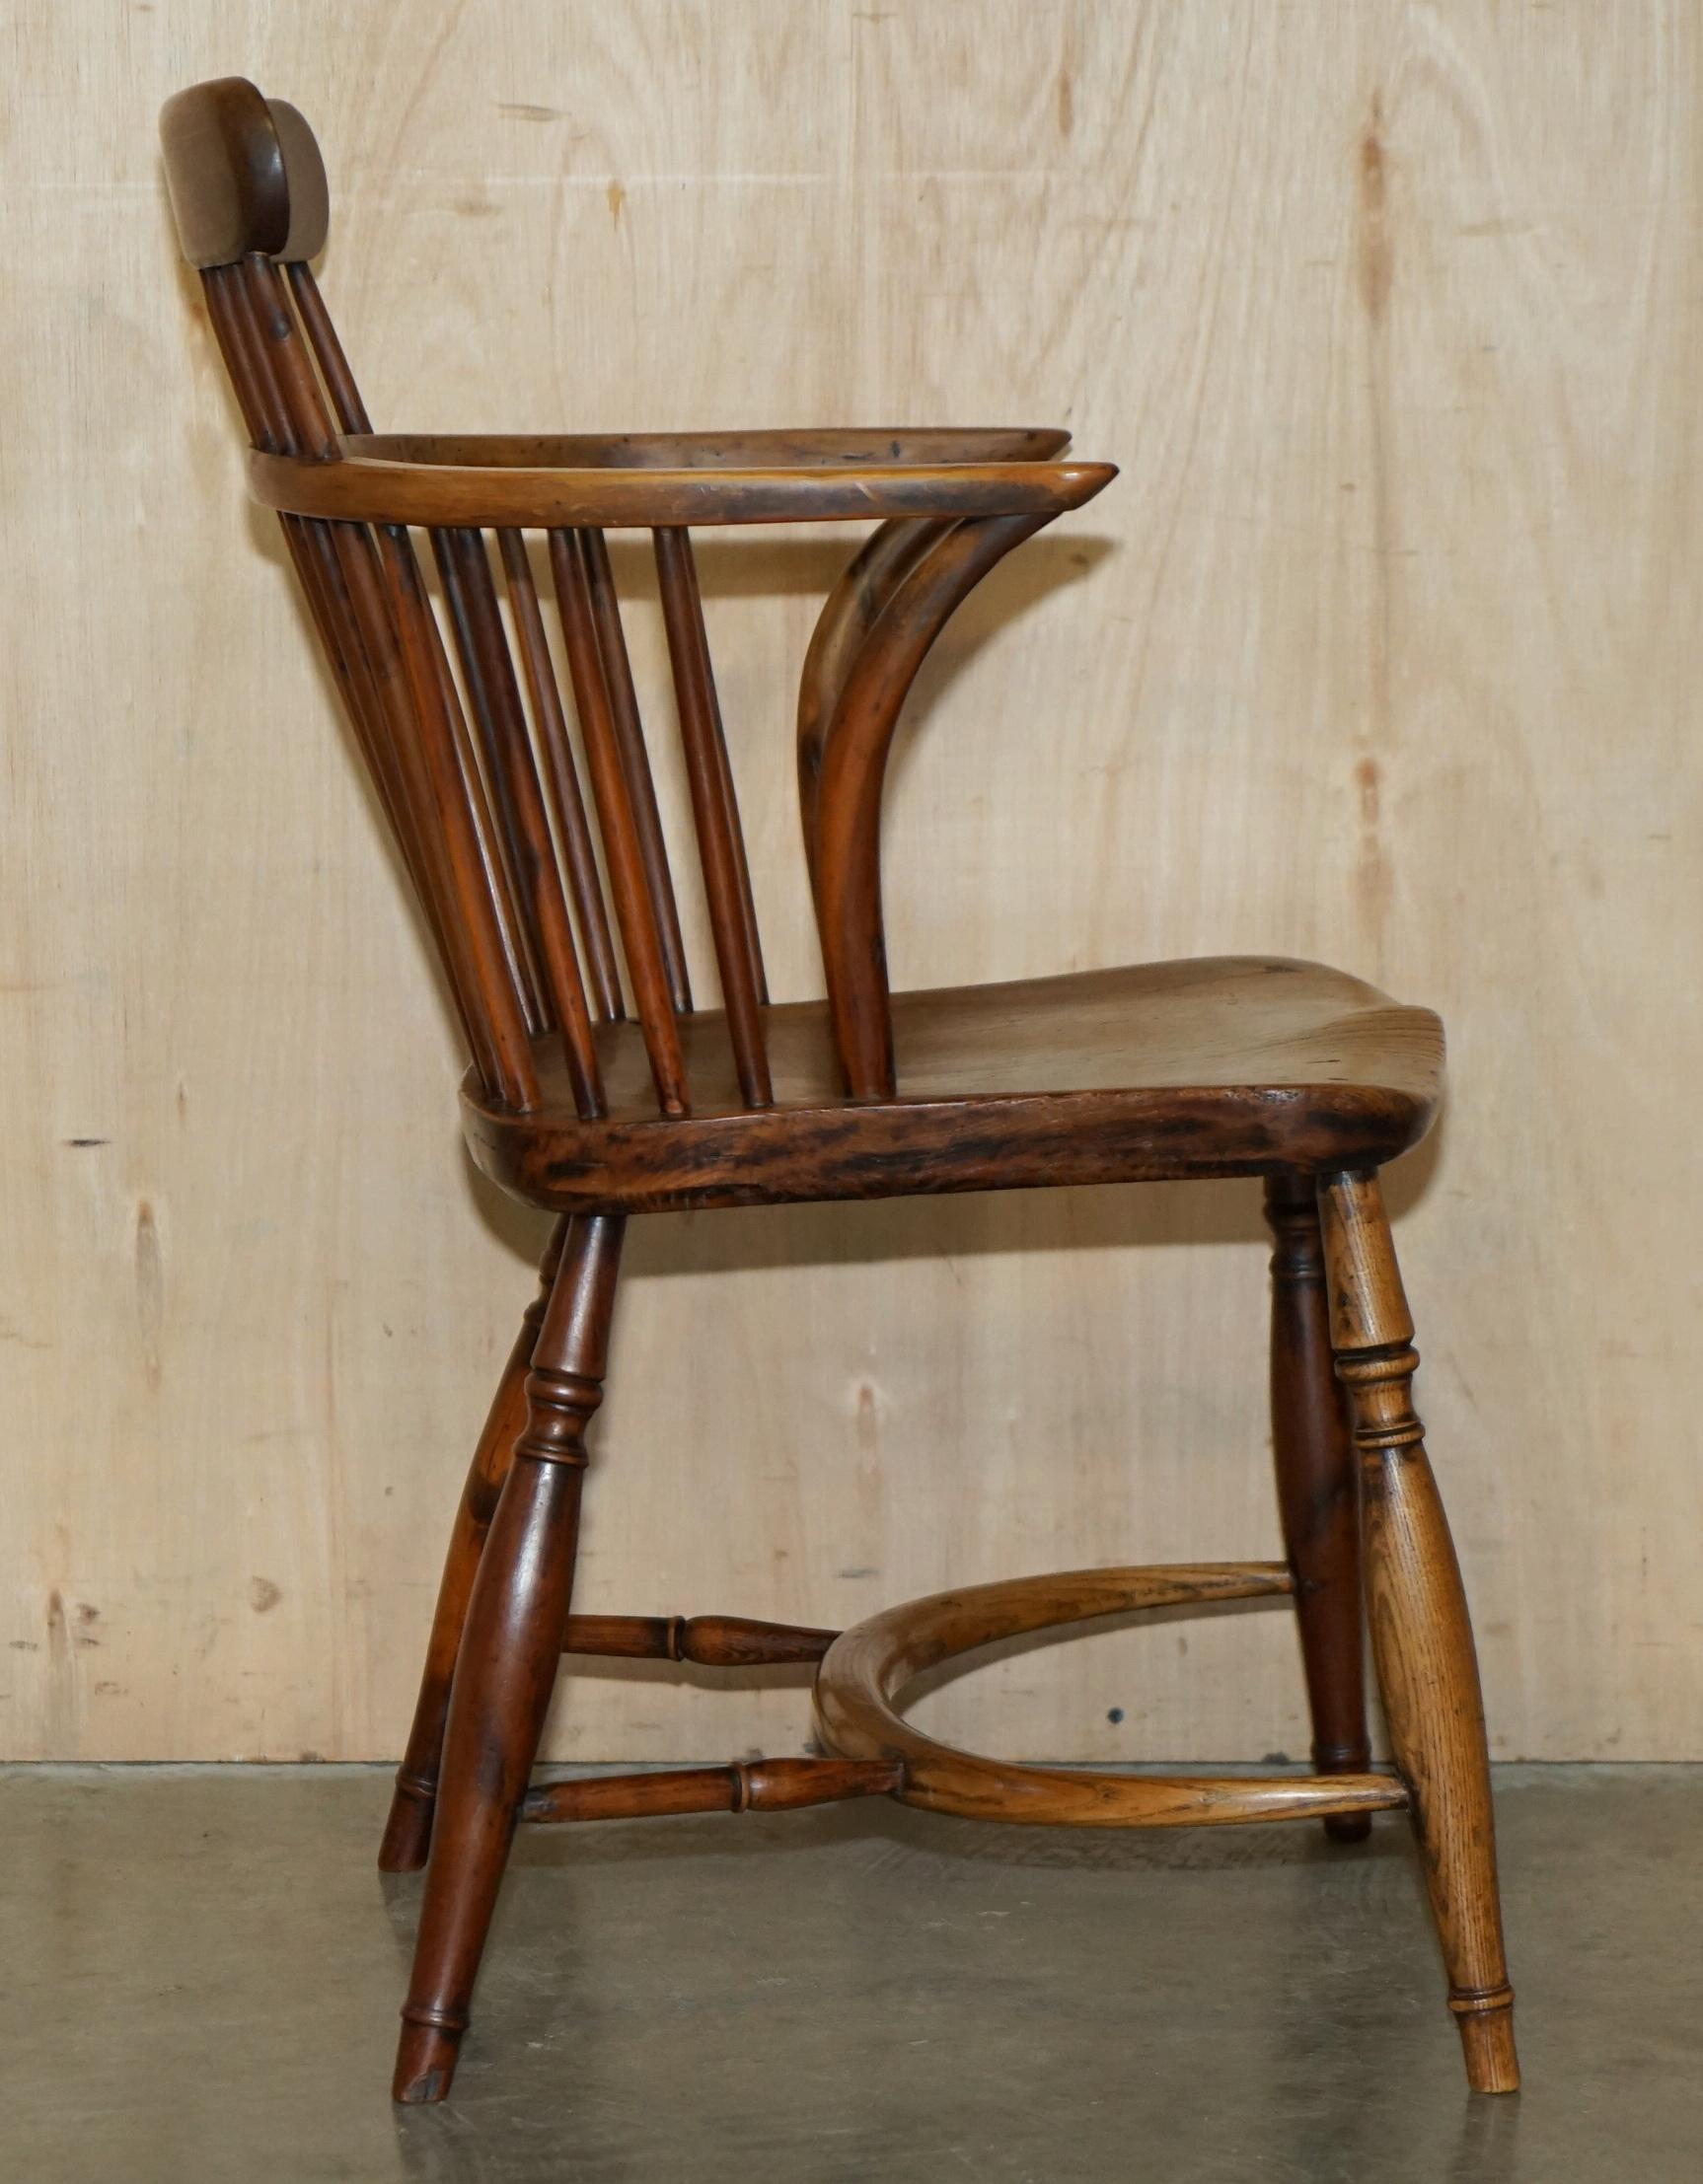 FINE ANTiQUE EARLY 19TH CENTURY BURR YEW WOOD & ELM COMB BACK WINDSOR ARMCHAIR For Sale 4